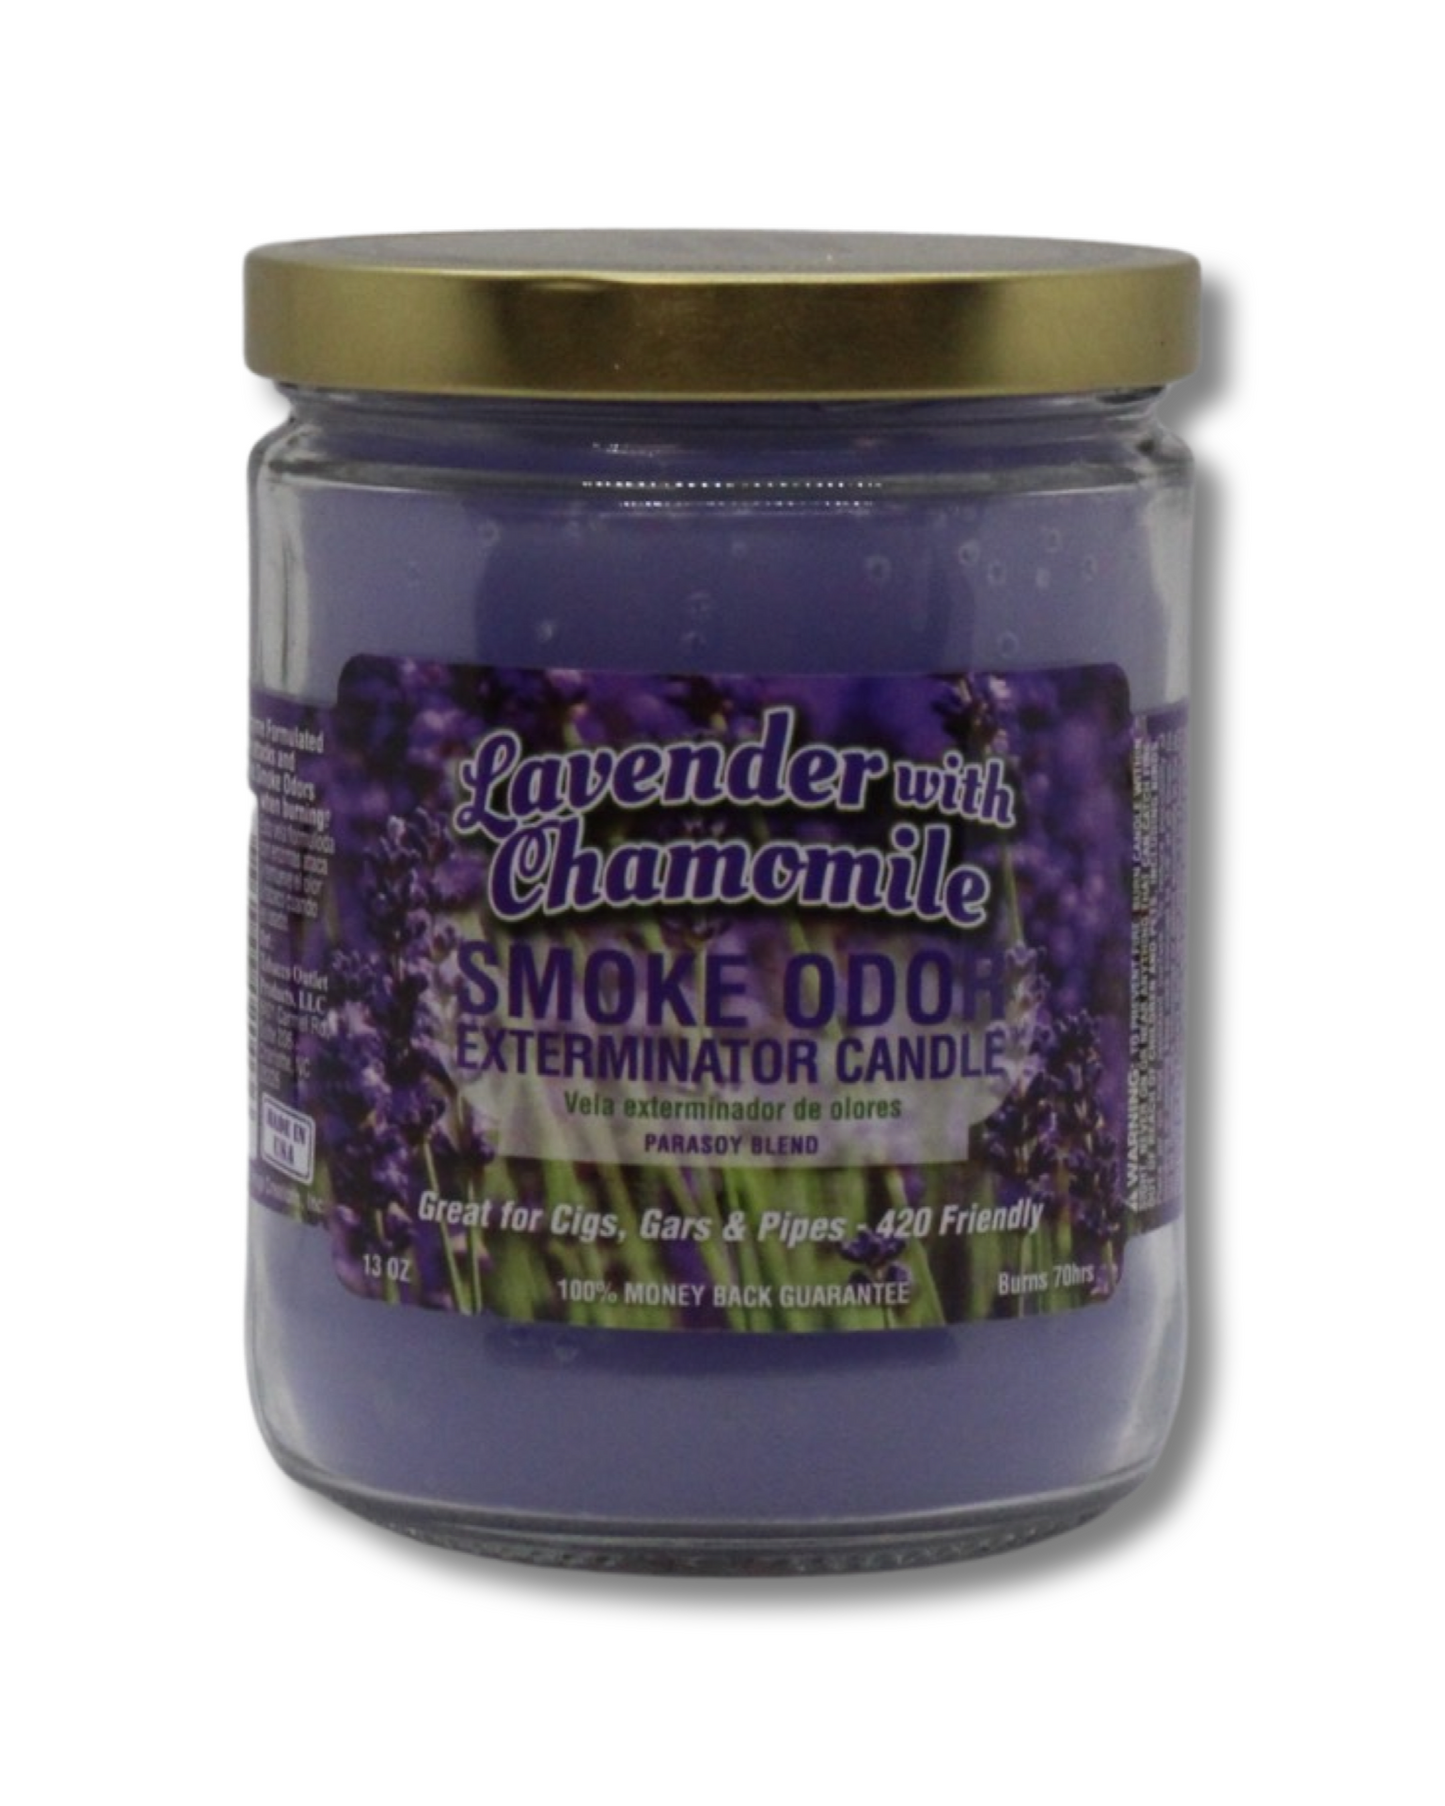 Smoke Odor Exterminator Candle Lavender with Chamomile